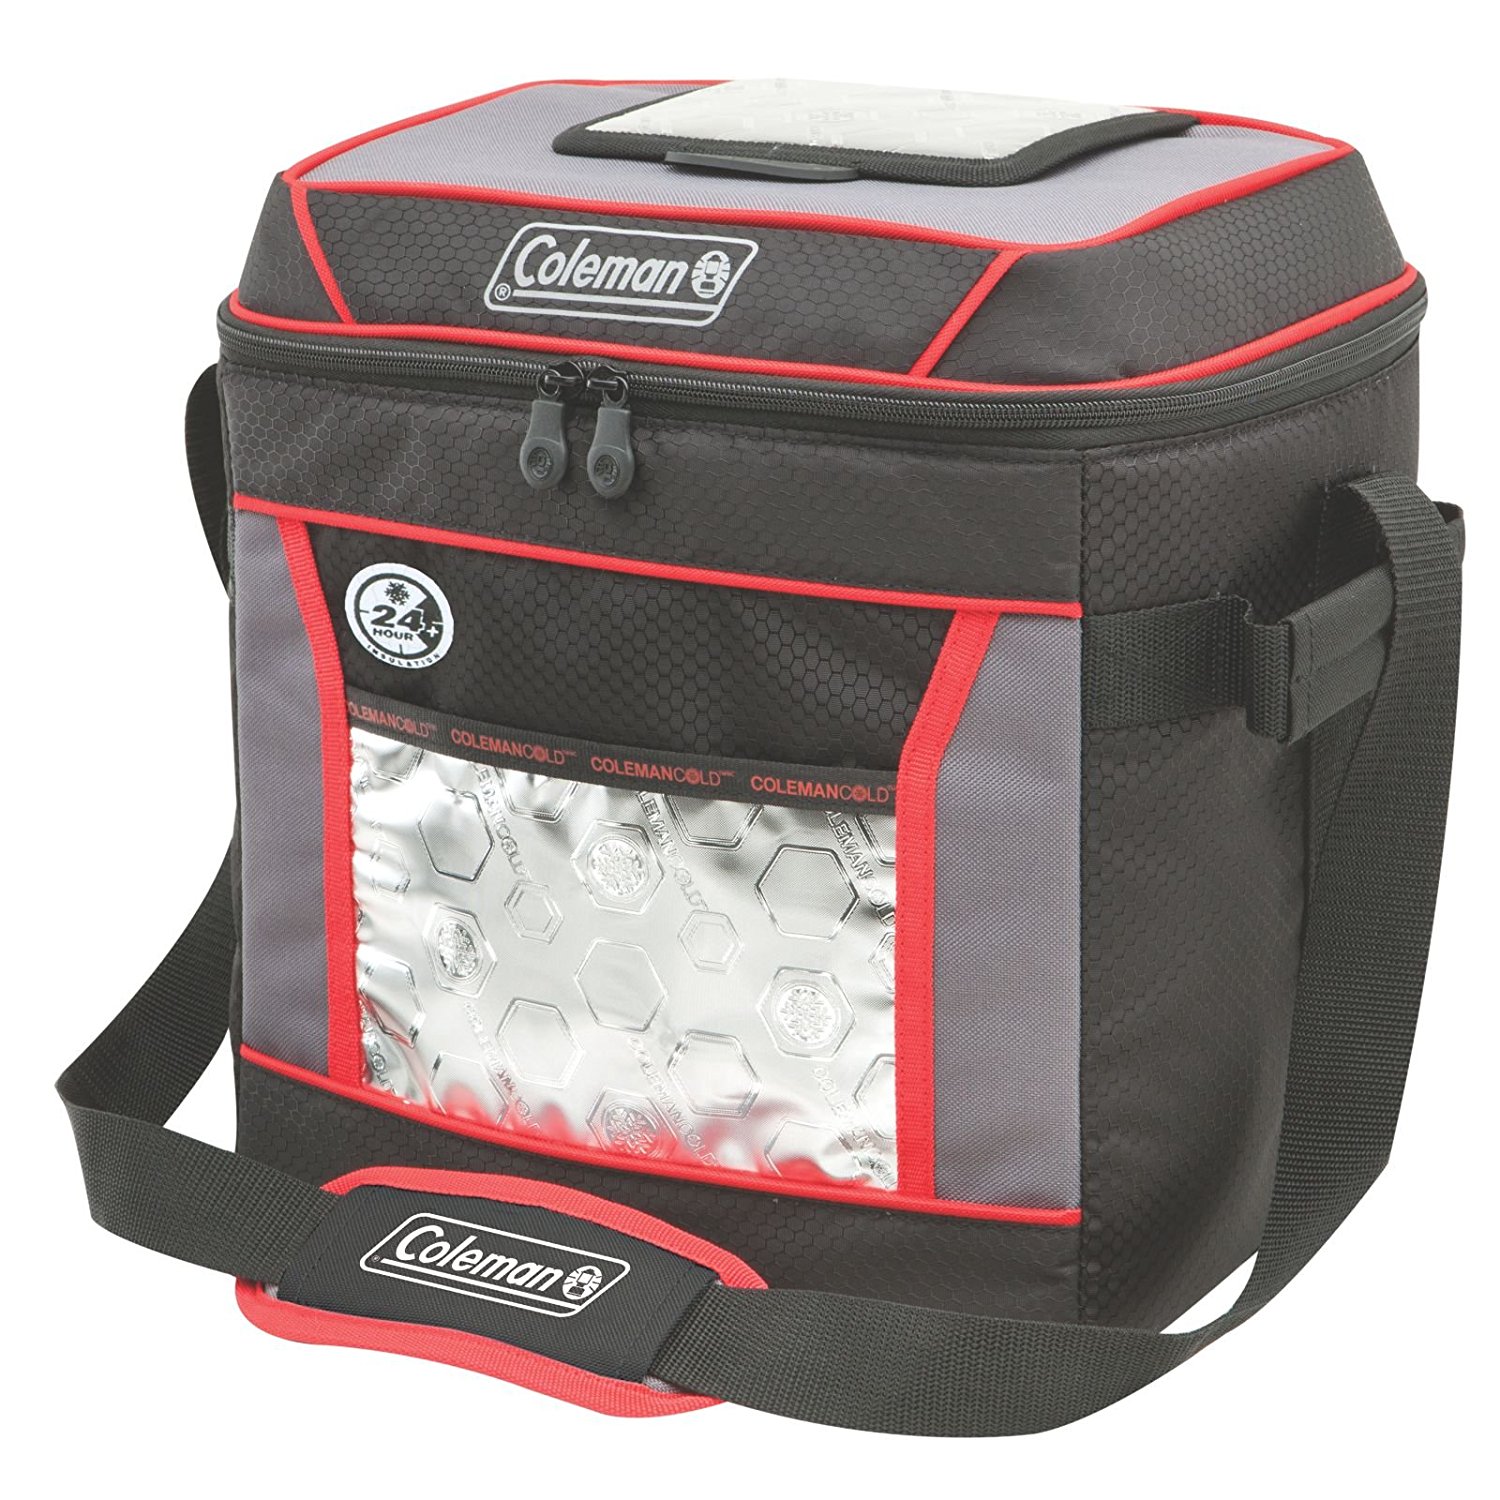 Coleman 24-hour cold 30-can cooler for $14.20